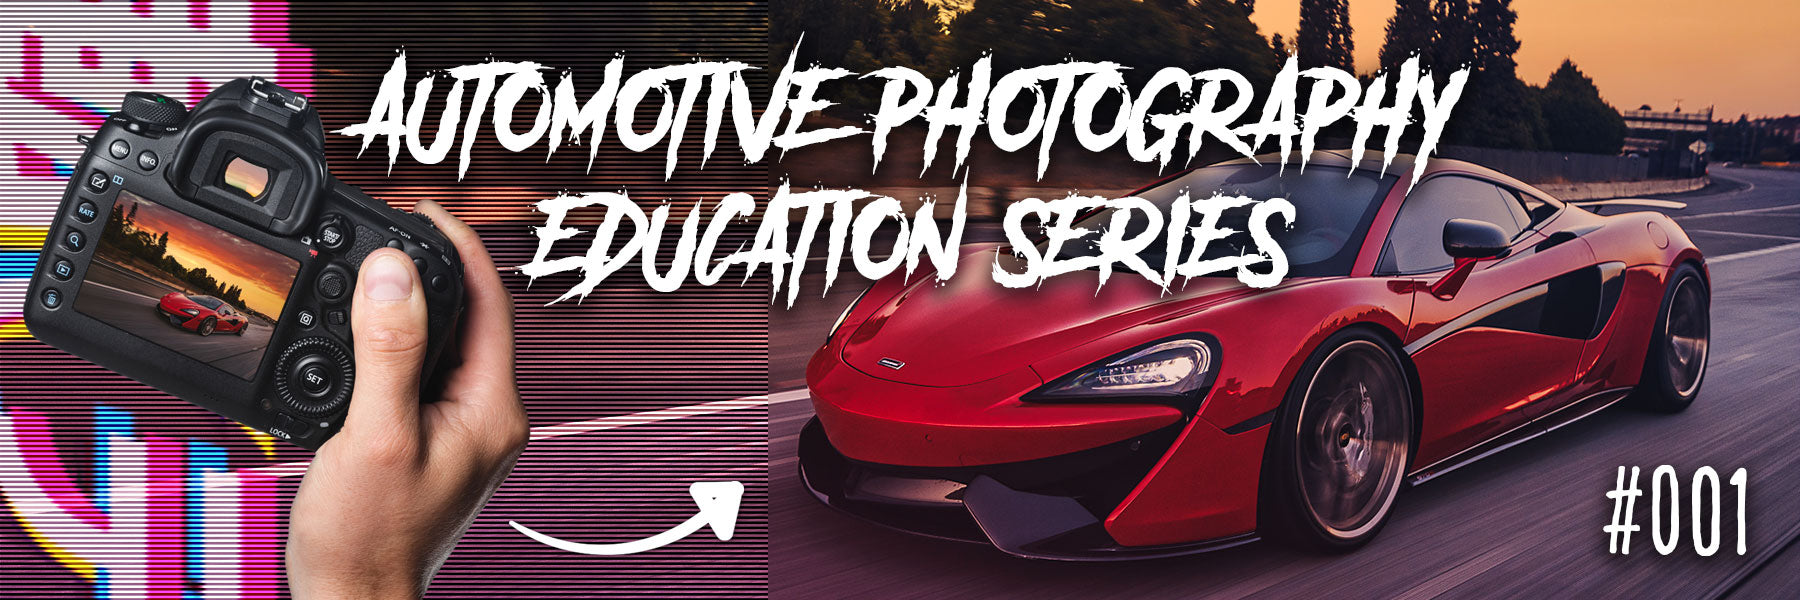 DailyDriven Photography Education Series 001: Introduction to Automotive Photography